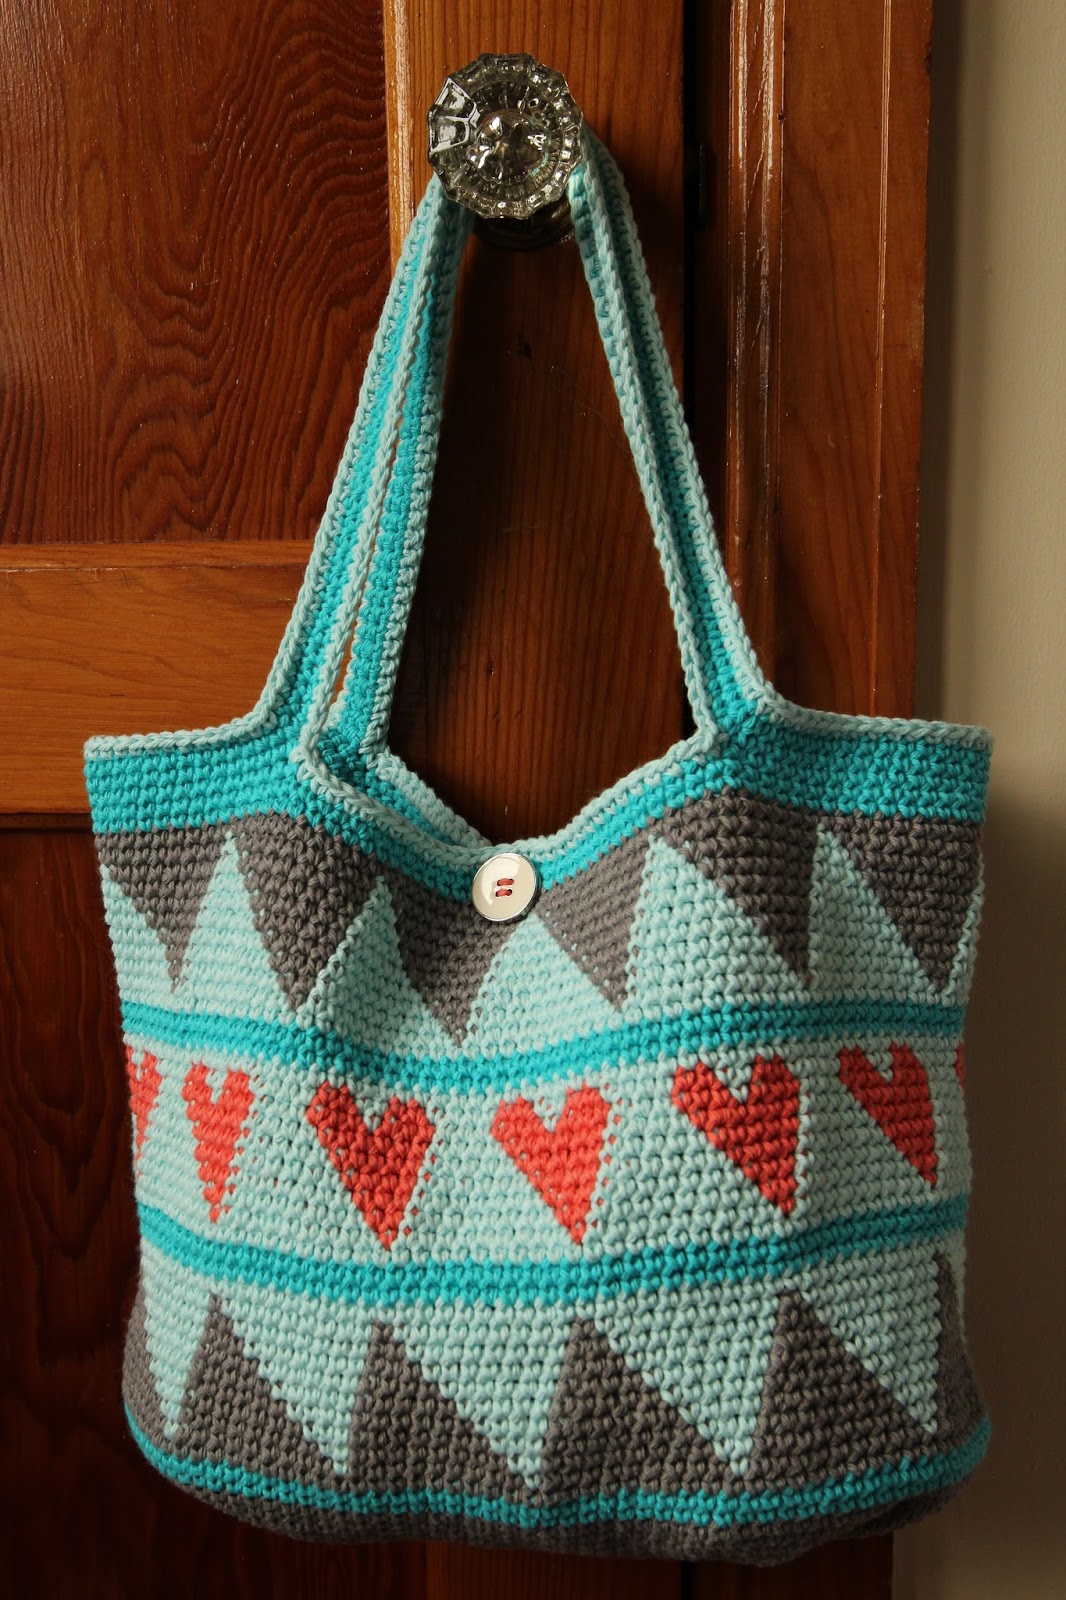 Megan's Crochet Patterns and Creations: Simple Crochet Tote